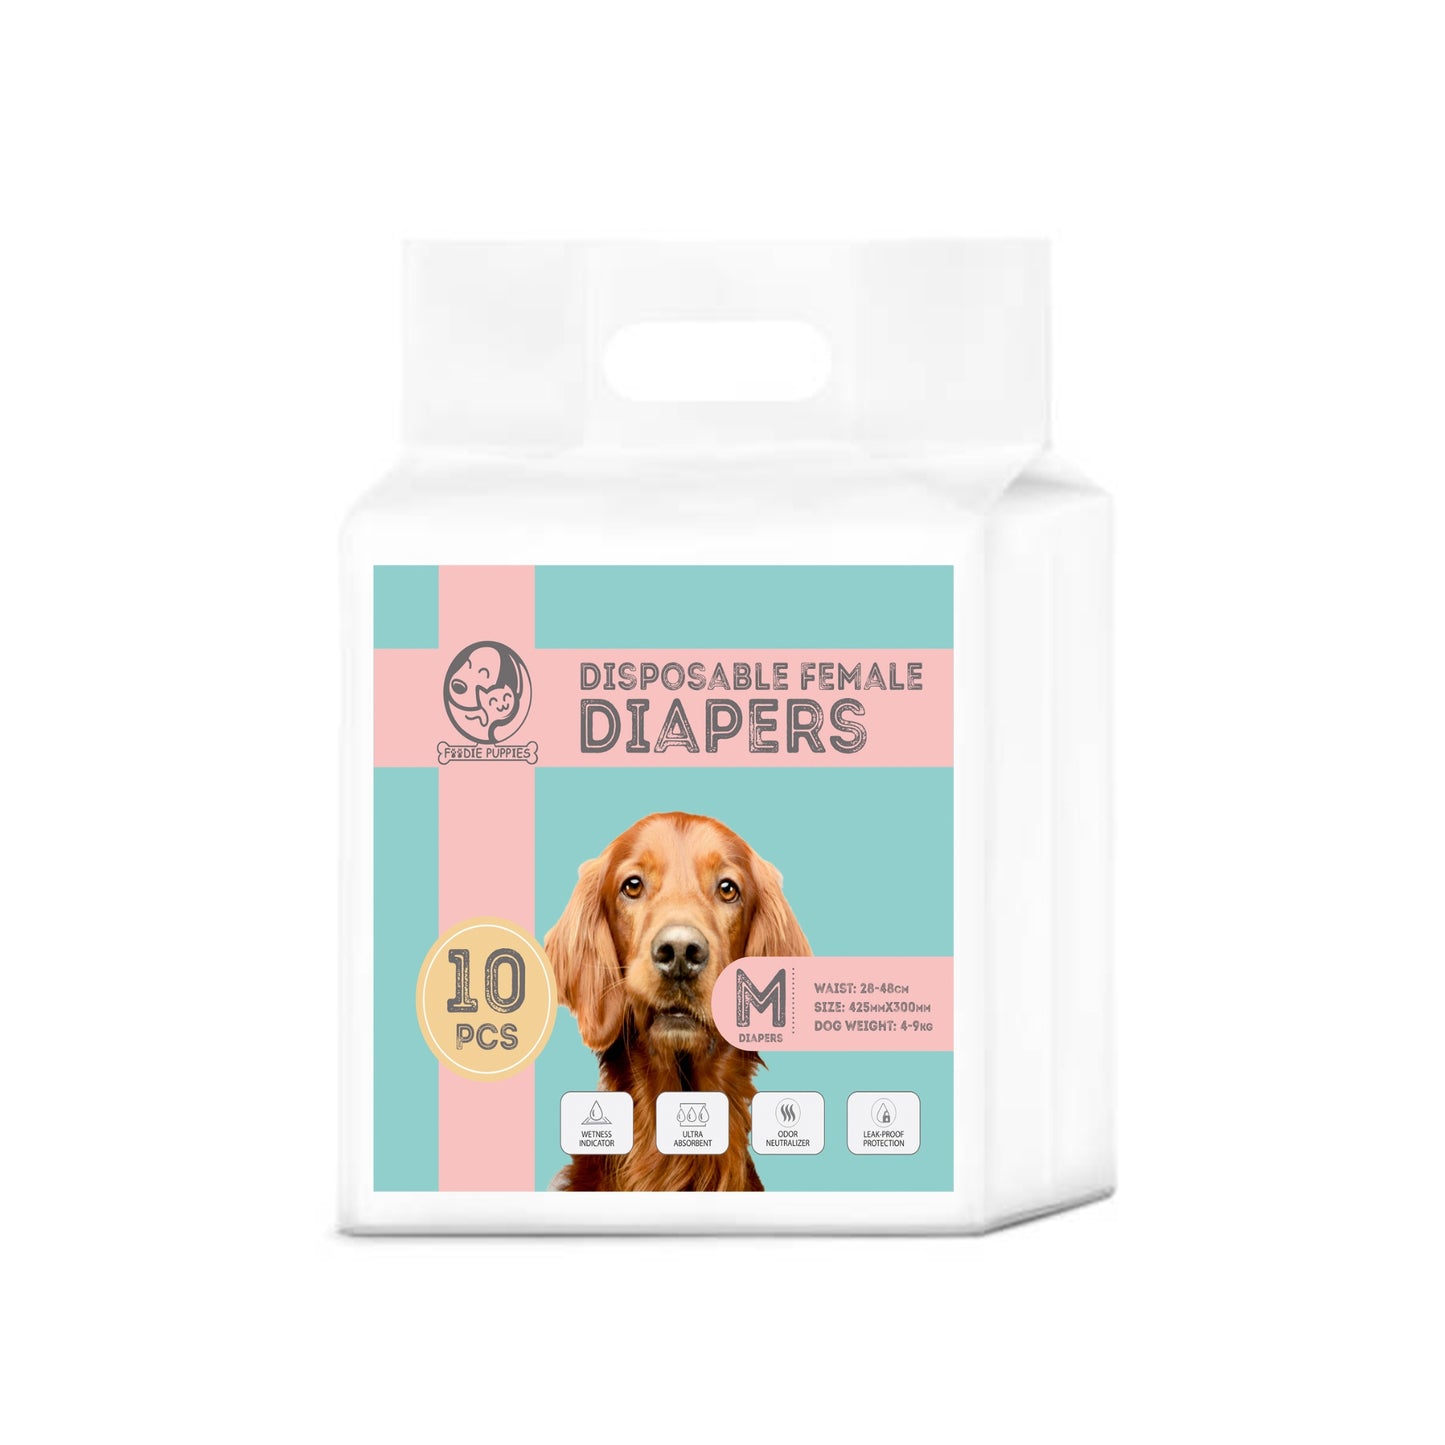 Foodie Puppies Disposable Dog Diapers for Female Dogs - Medium